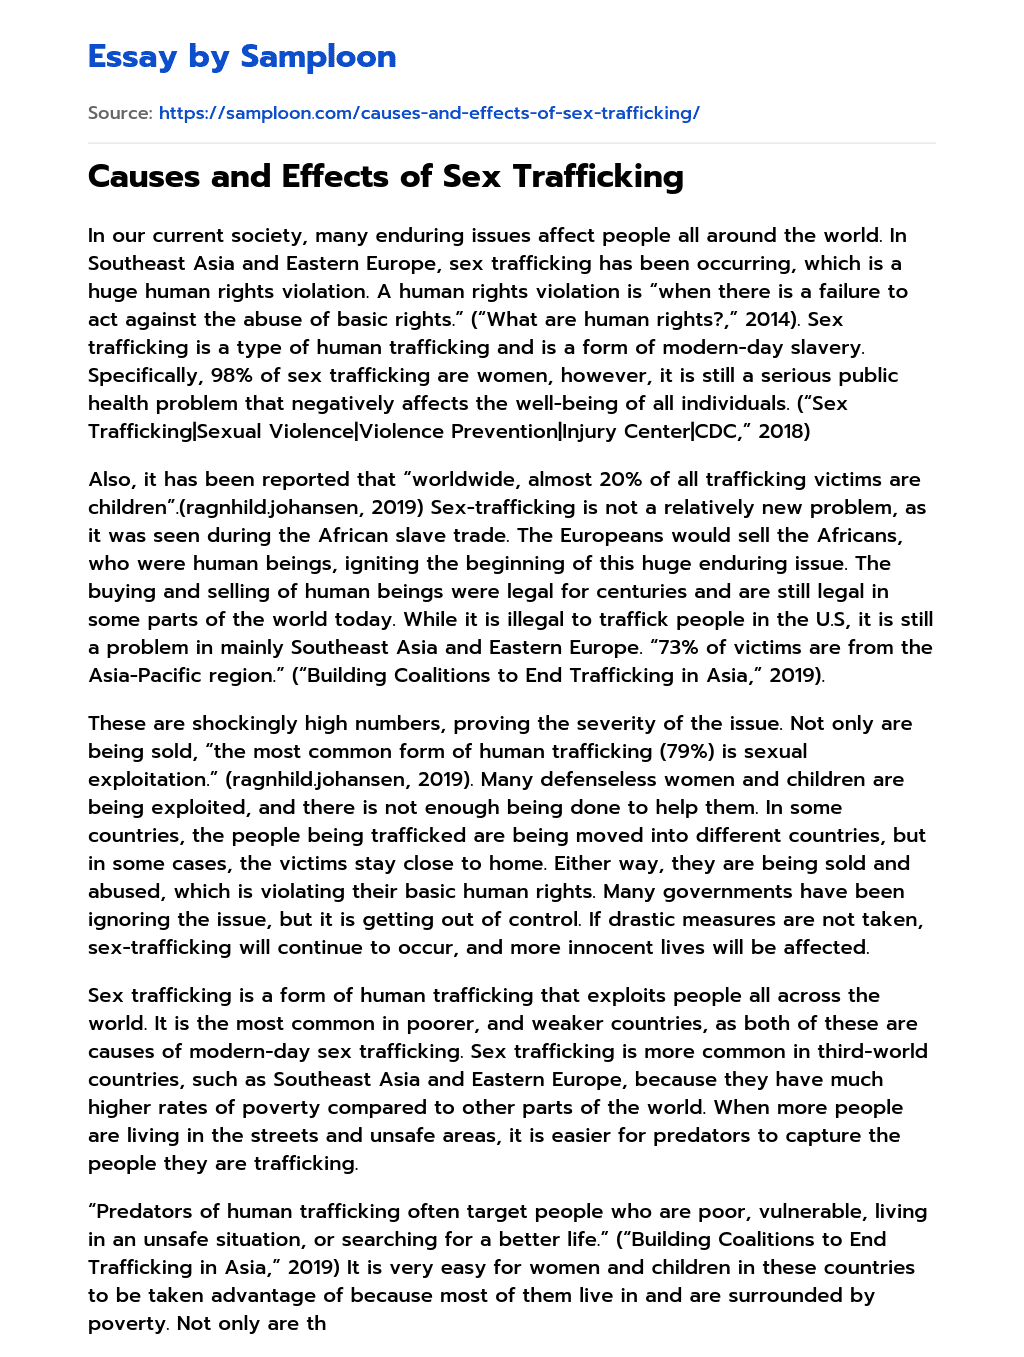 Causes and Effects of Sex Trafficking essay